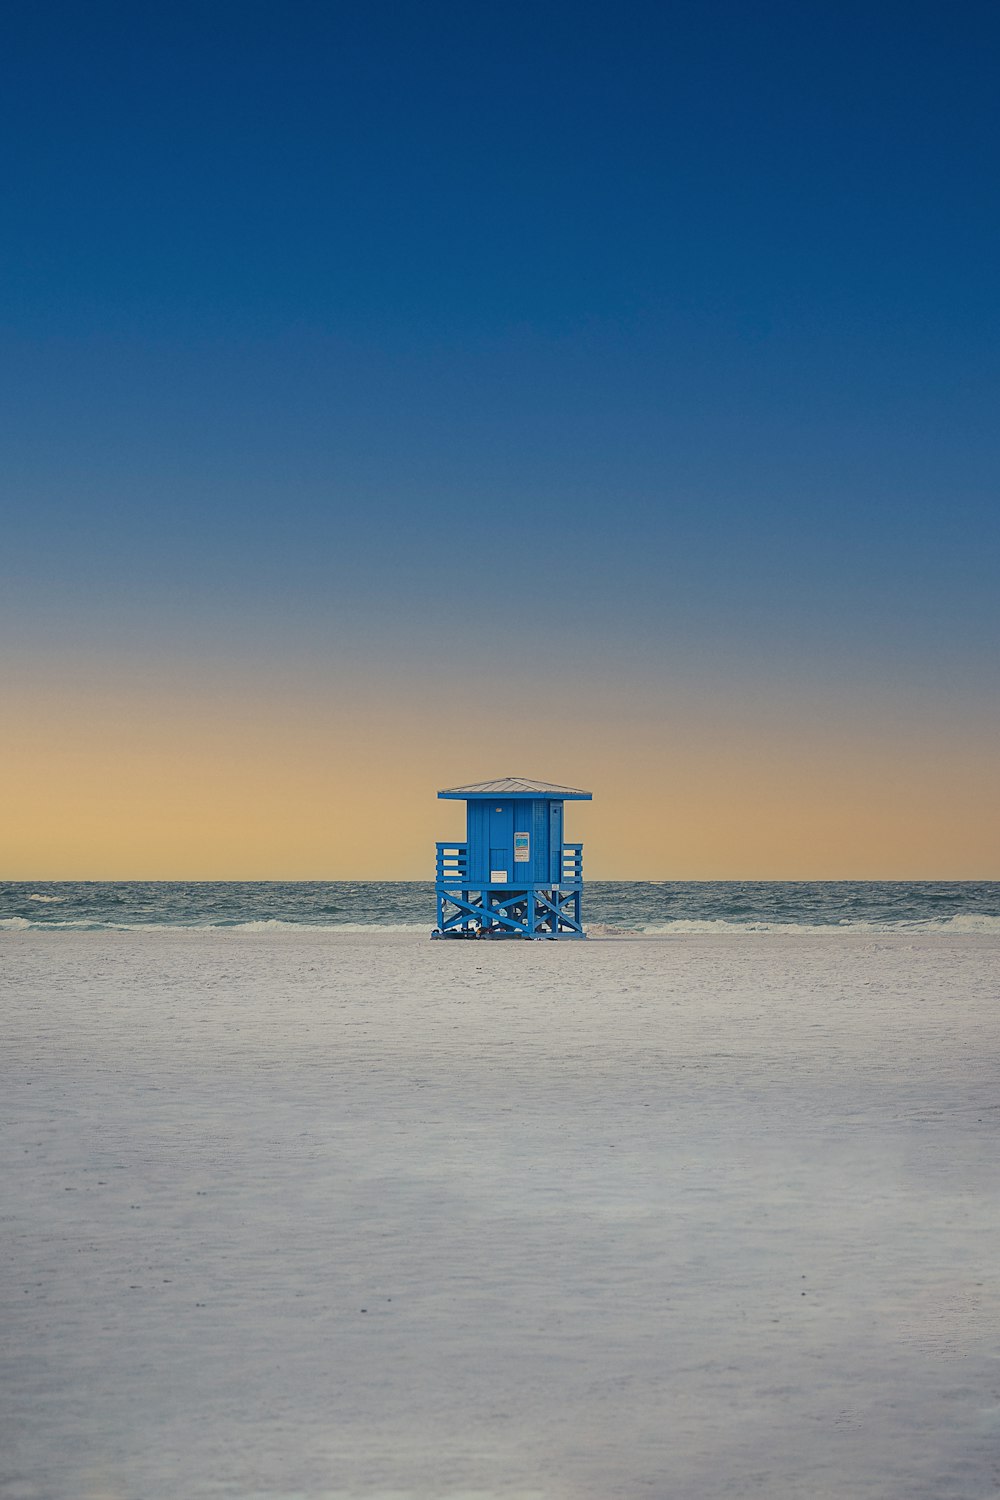 blue wooden lifeguard house on beach during daytime